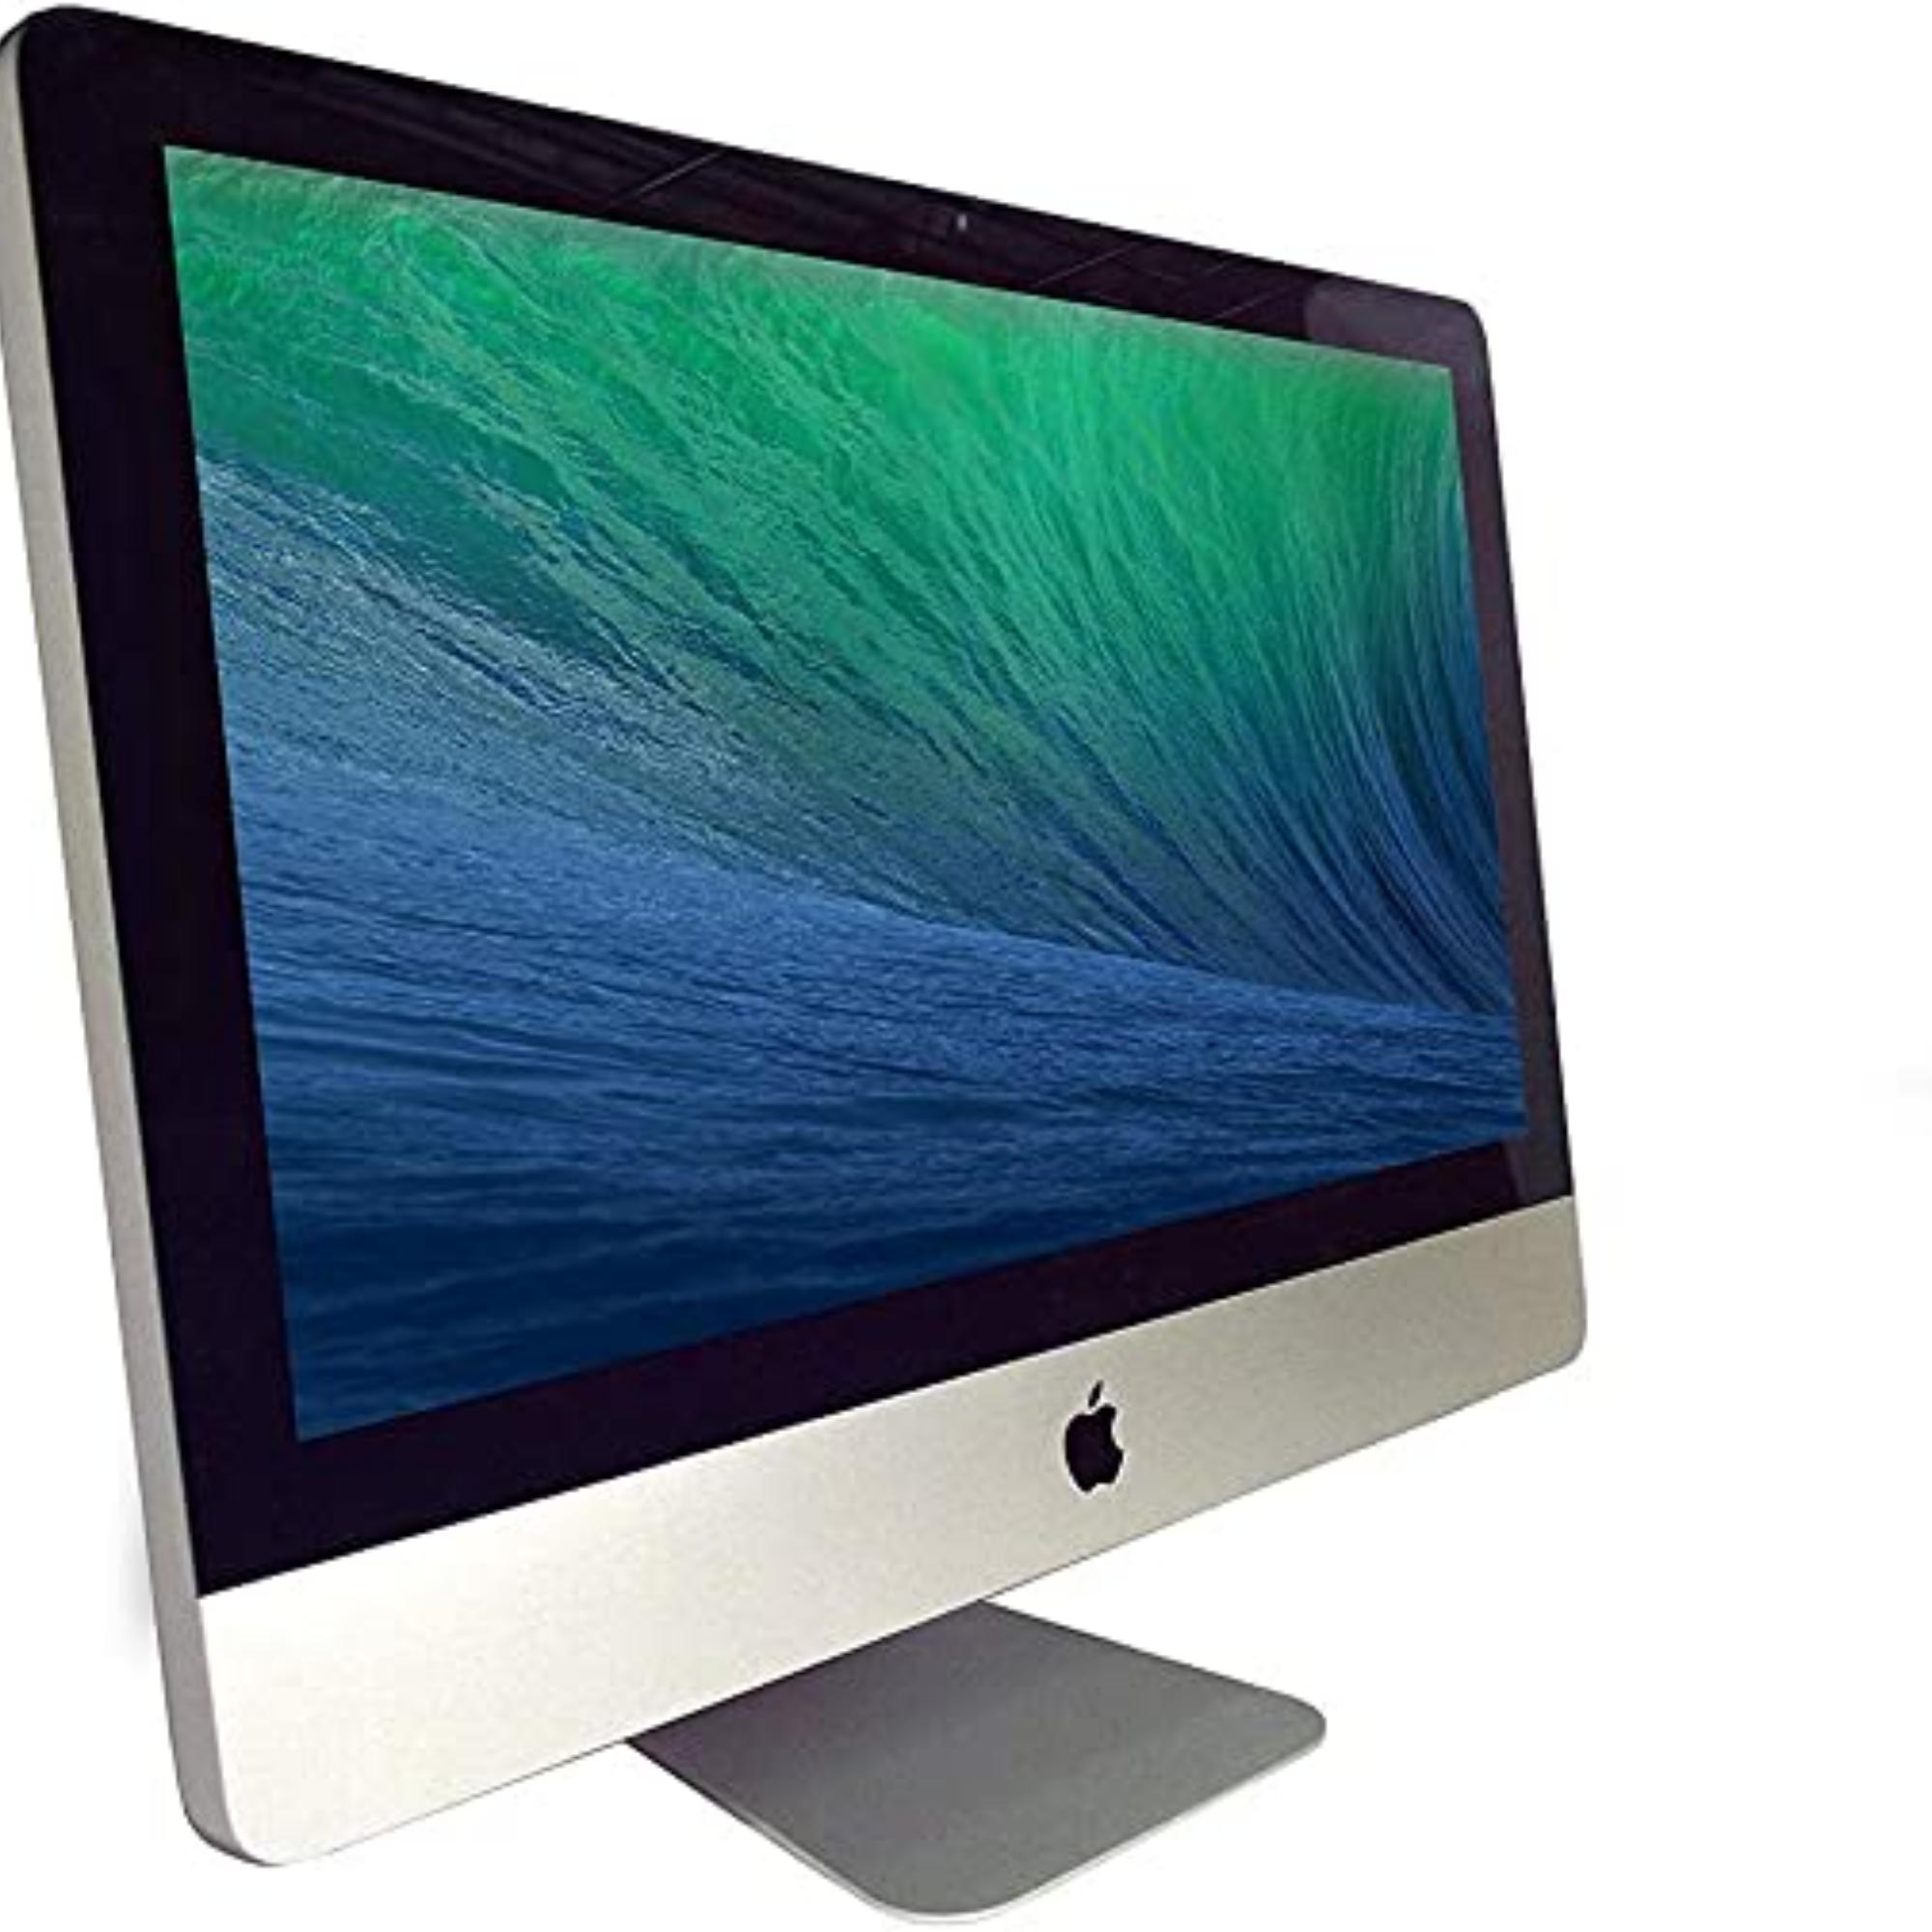 iMac – APPLE IMAC A1311 / INTEL E7600 / 500GB HDD / 4GB /  21.5″ / NVIDIA GEFORCE 9400M / MACOS – A13112D-B<br><br><span STYLE="background:#39ac37;"><font color="white"> DISPONIBILE </font></span>